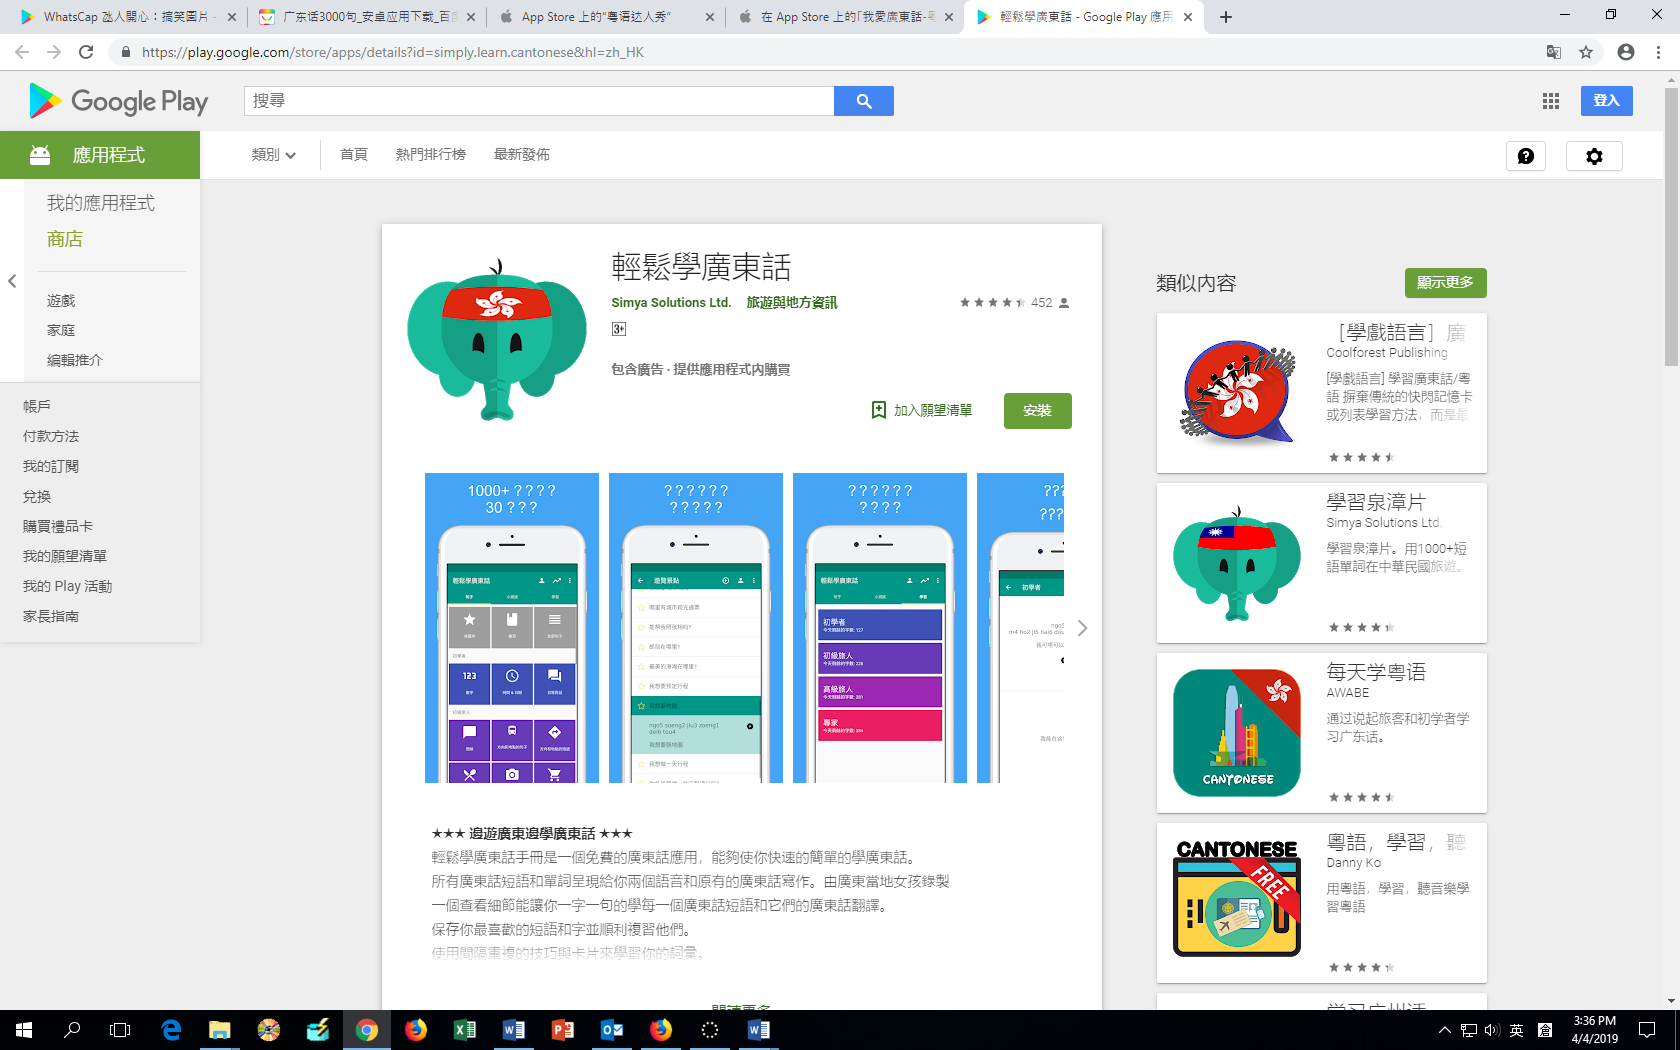 https://play.google.com/store/apps/details?id=simply.learn.cantonese&hl=zh_HK